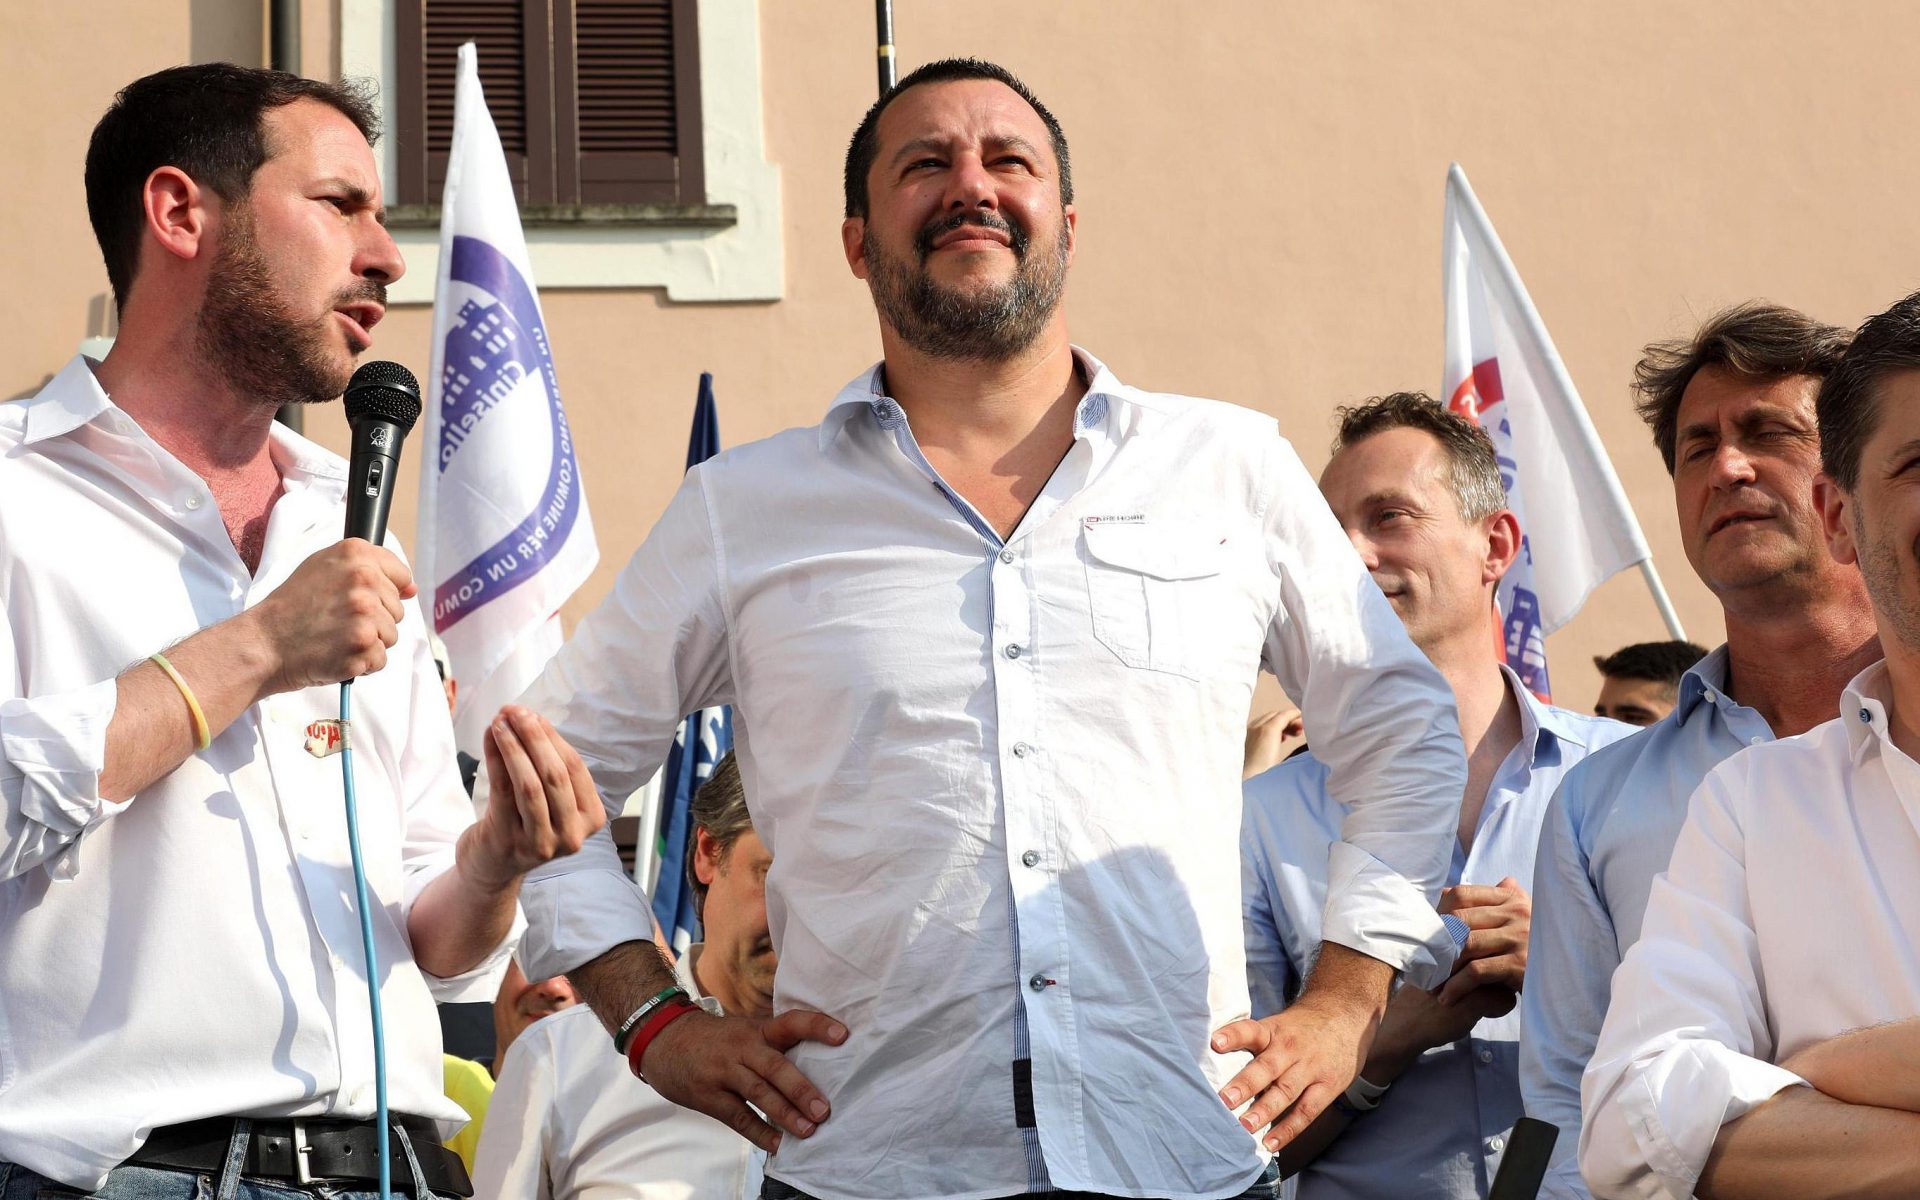 salvini rally right wing parties europe